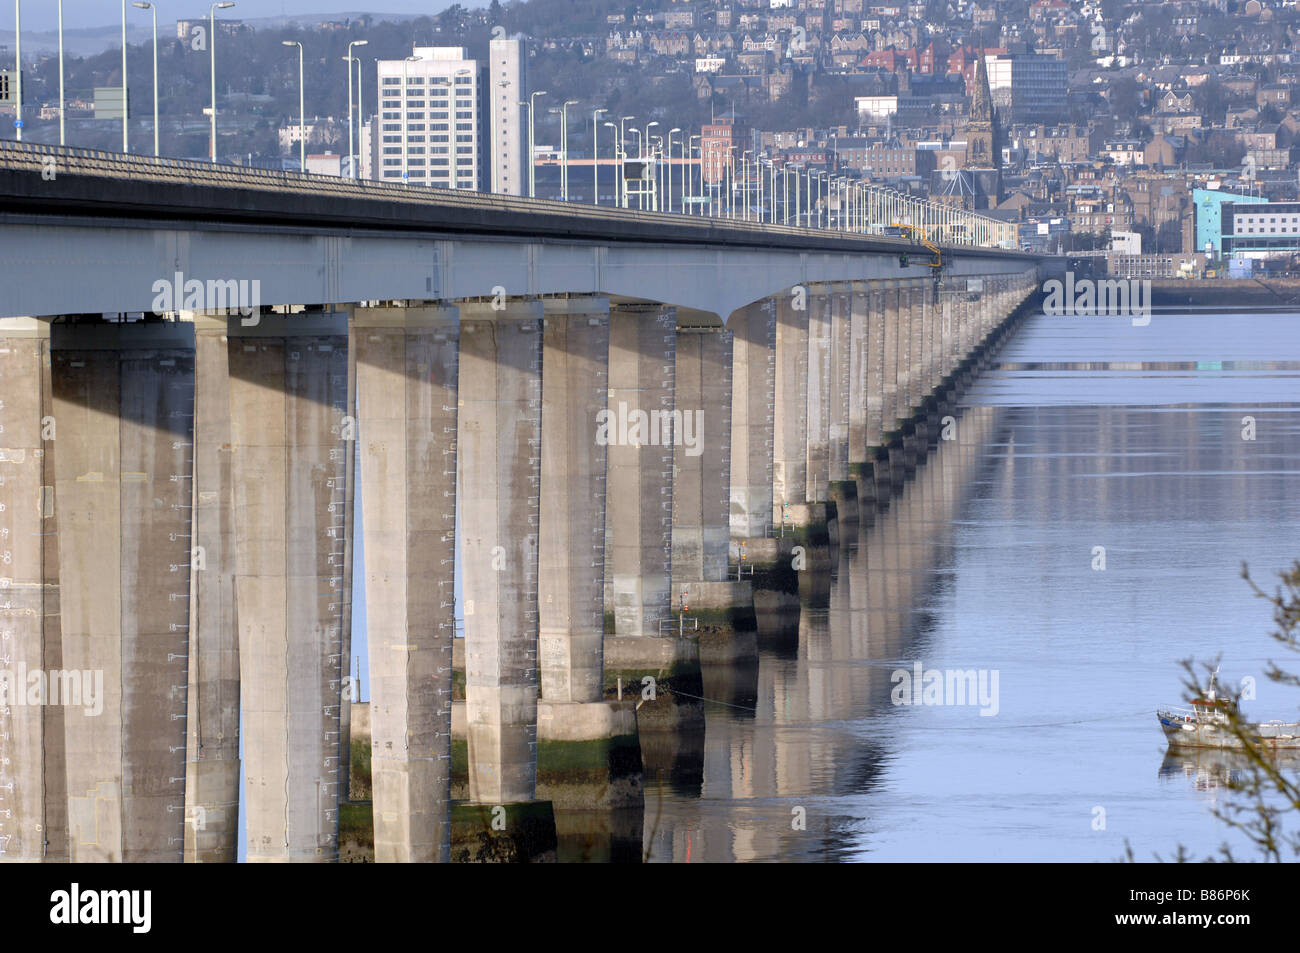 The Tay Bridge across the Tay river into Dundee City in Scotland. Stock Photo